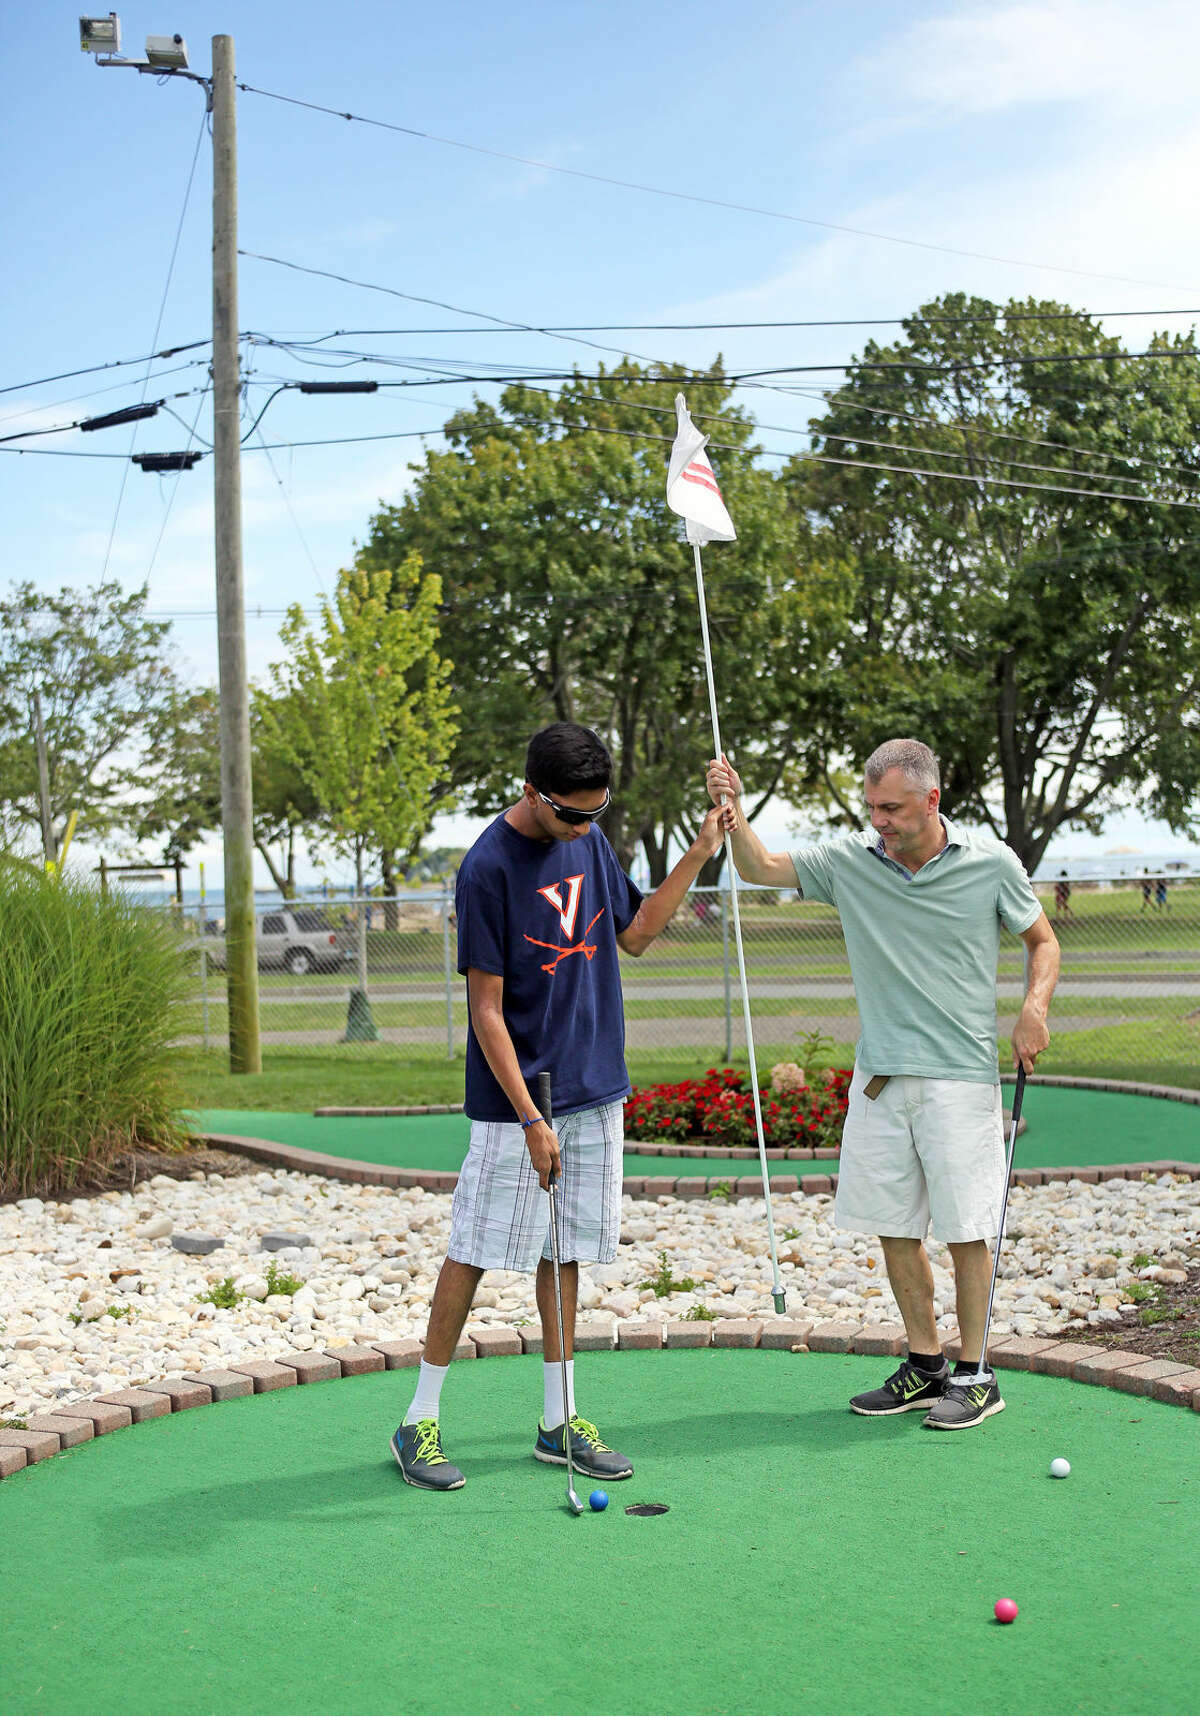 Steve Gatto plays a round with her Sanjeev Jariwala at Norwalk Cove Marina Mini Golf Sunday afternoon. Hour Photo / Danielle Calloway